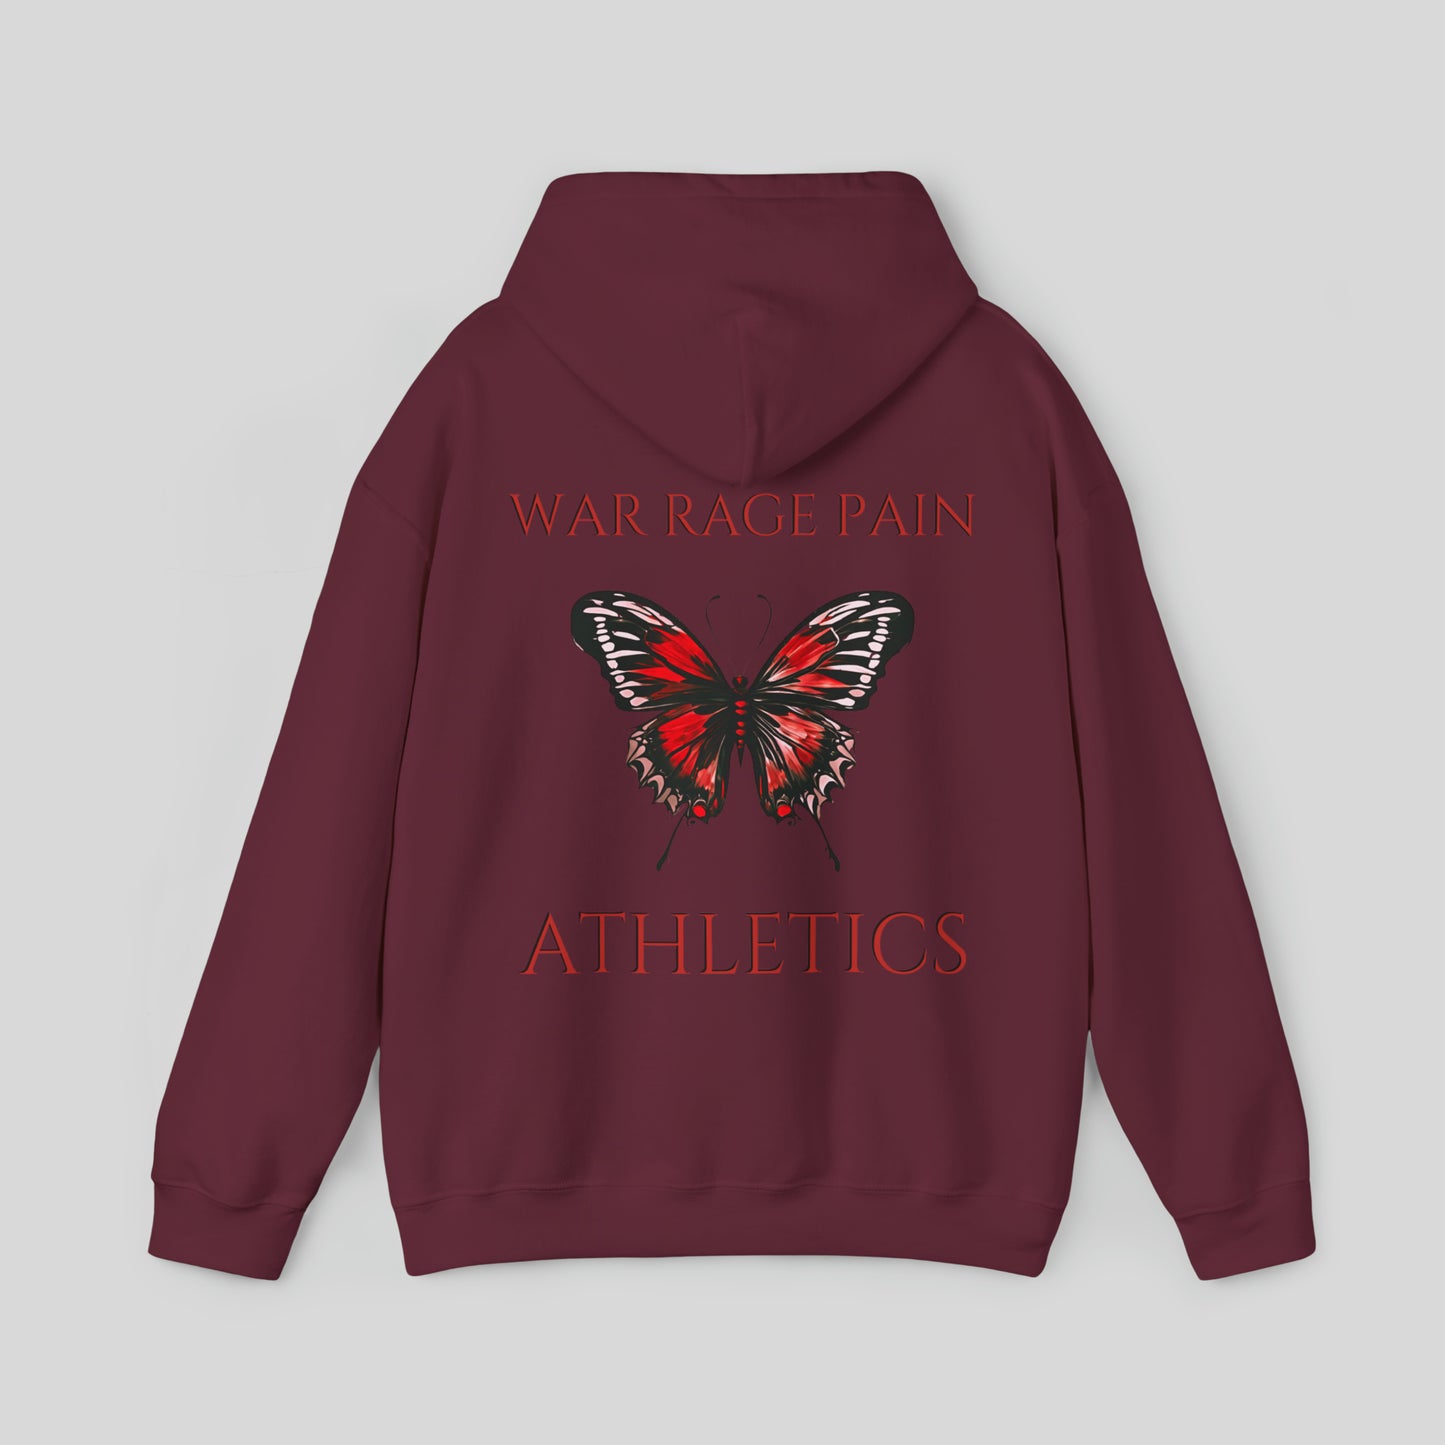 WRP Butterfly Hoodie